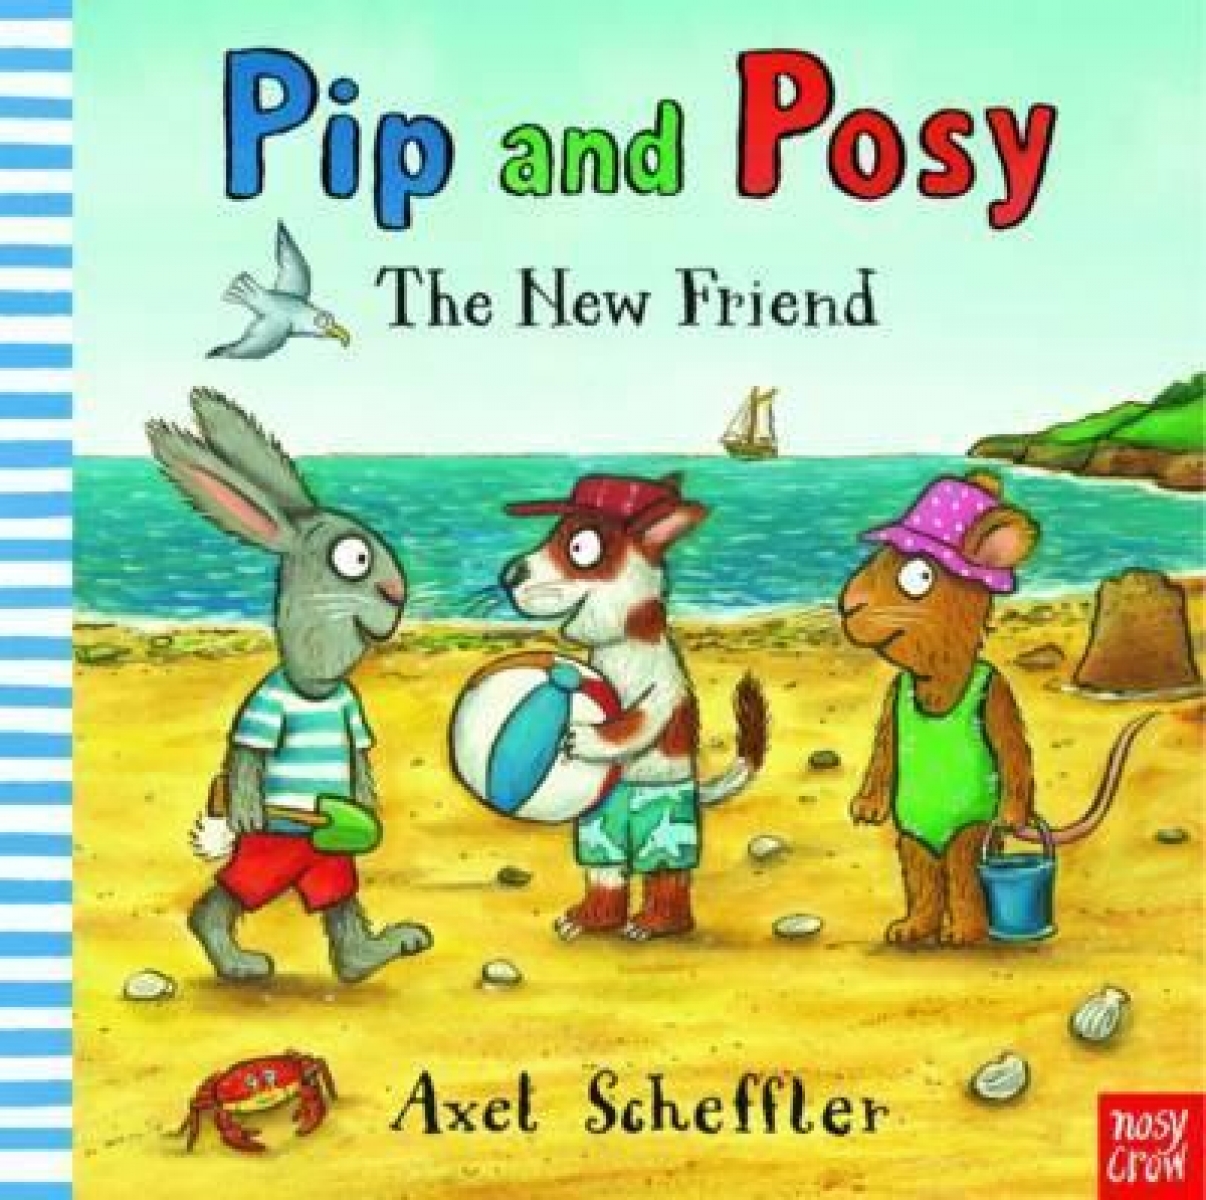 Scheffler Axel Pip and Posy: The New Friend 